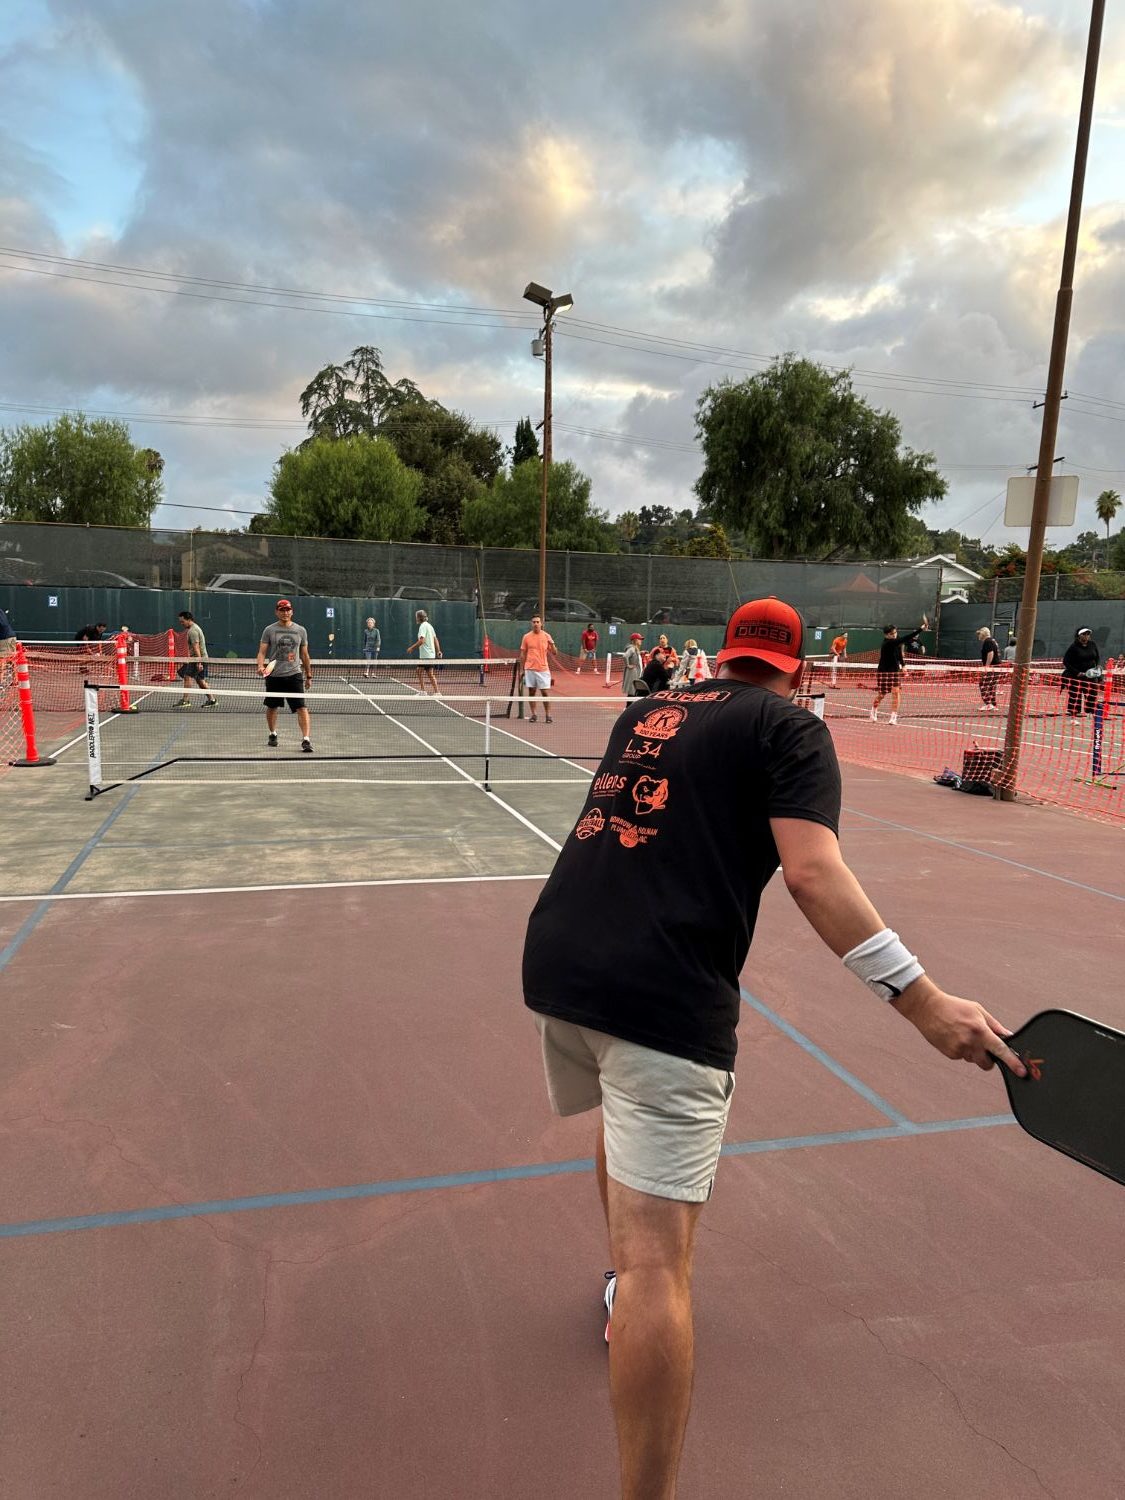 PHOTO: provided by D.U.D.E.S. | The South Pasadenan | Tournament participant Stephen McAlpin about to serve.